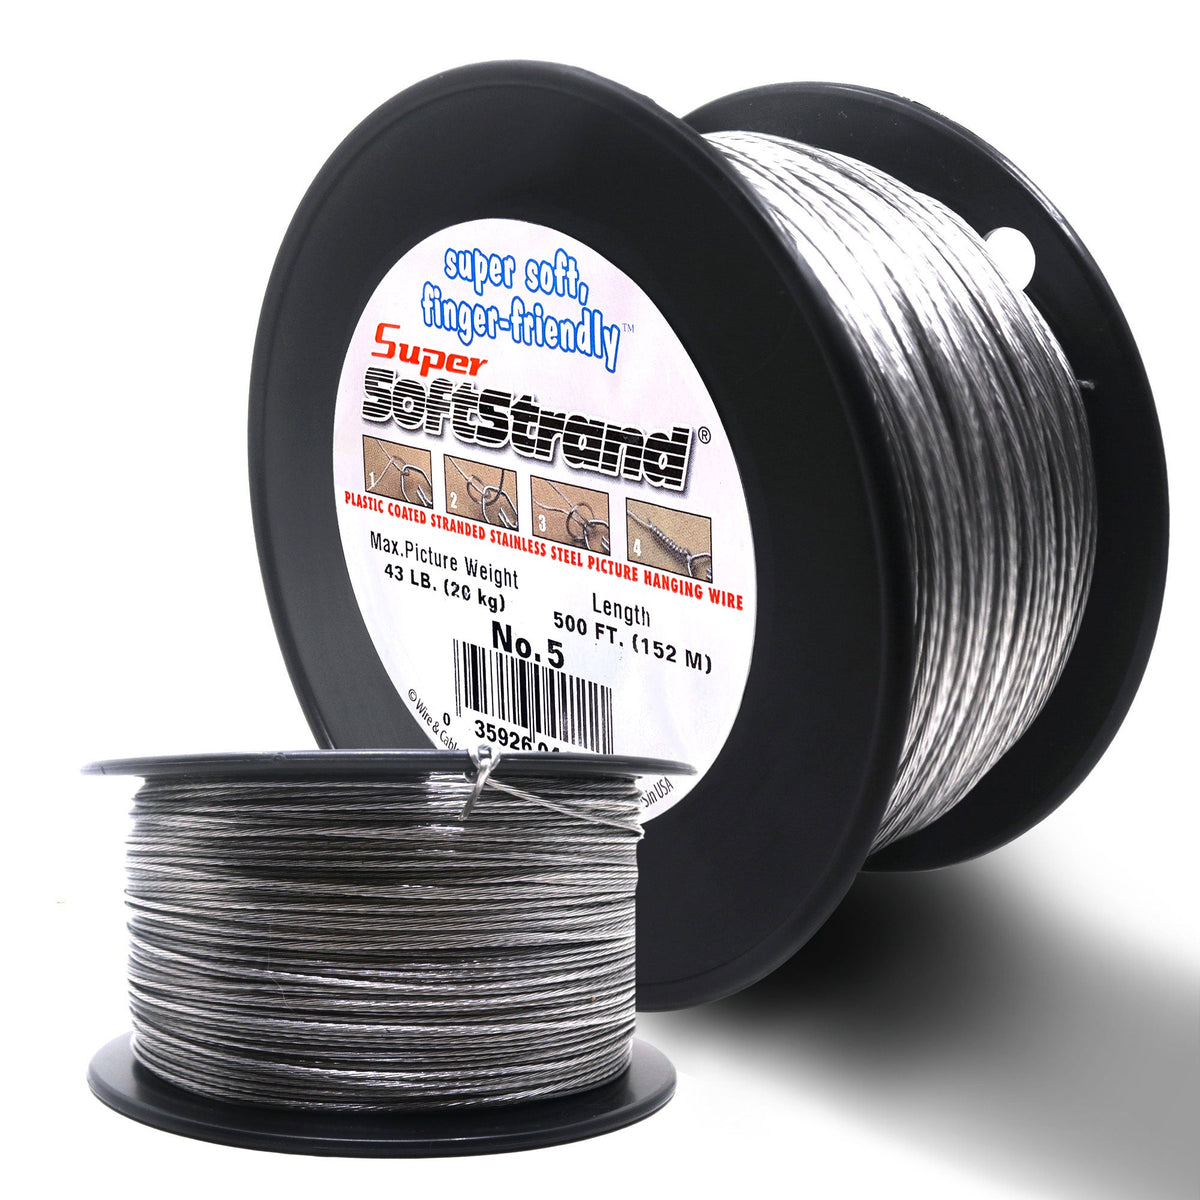 No. 5 Vinyl Coated Stainless Wire 500ft - S - BOX - 6501 - Picture Hang Solutions